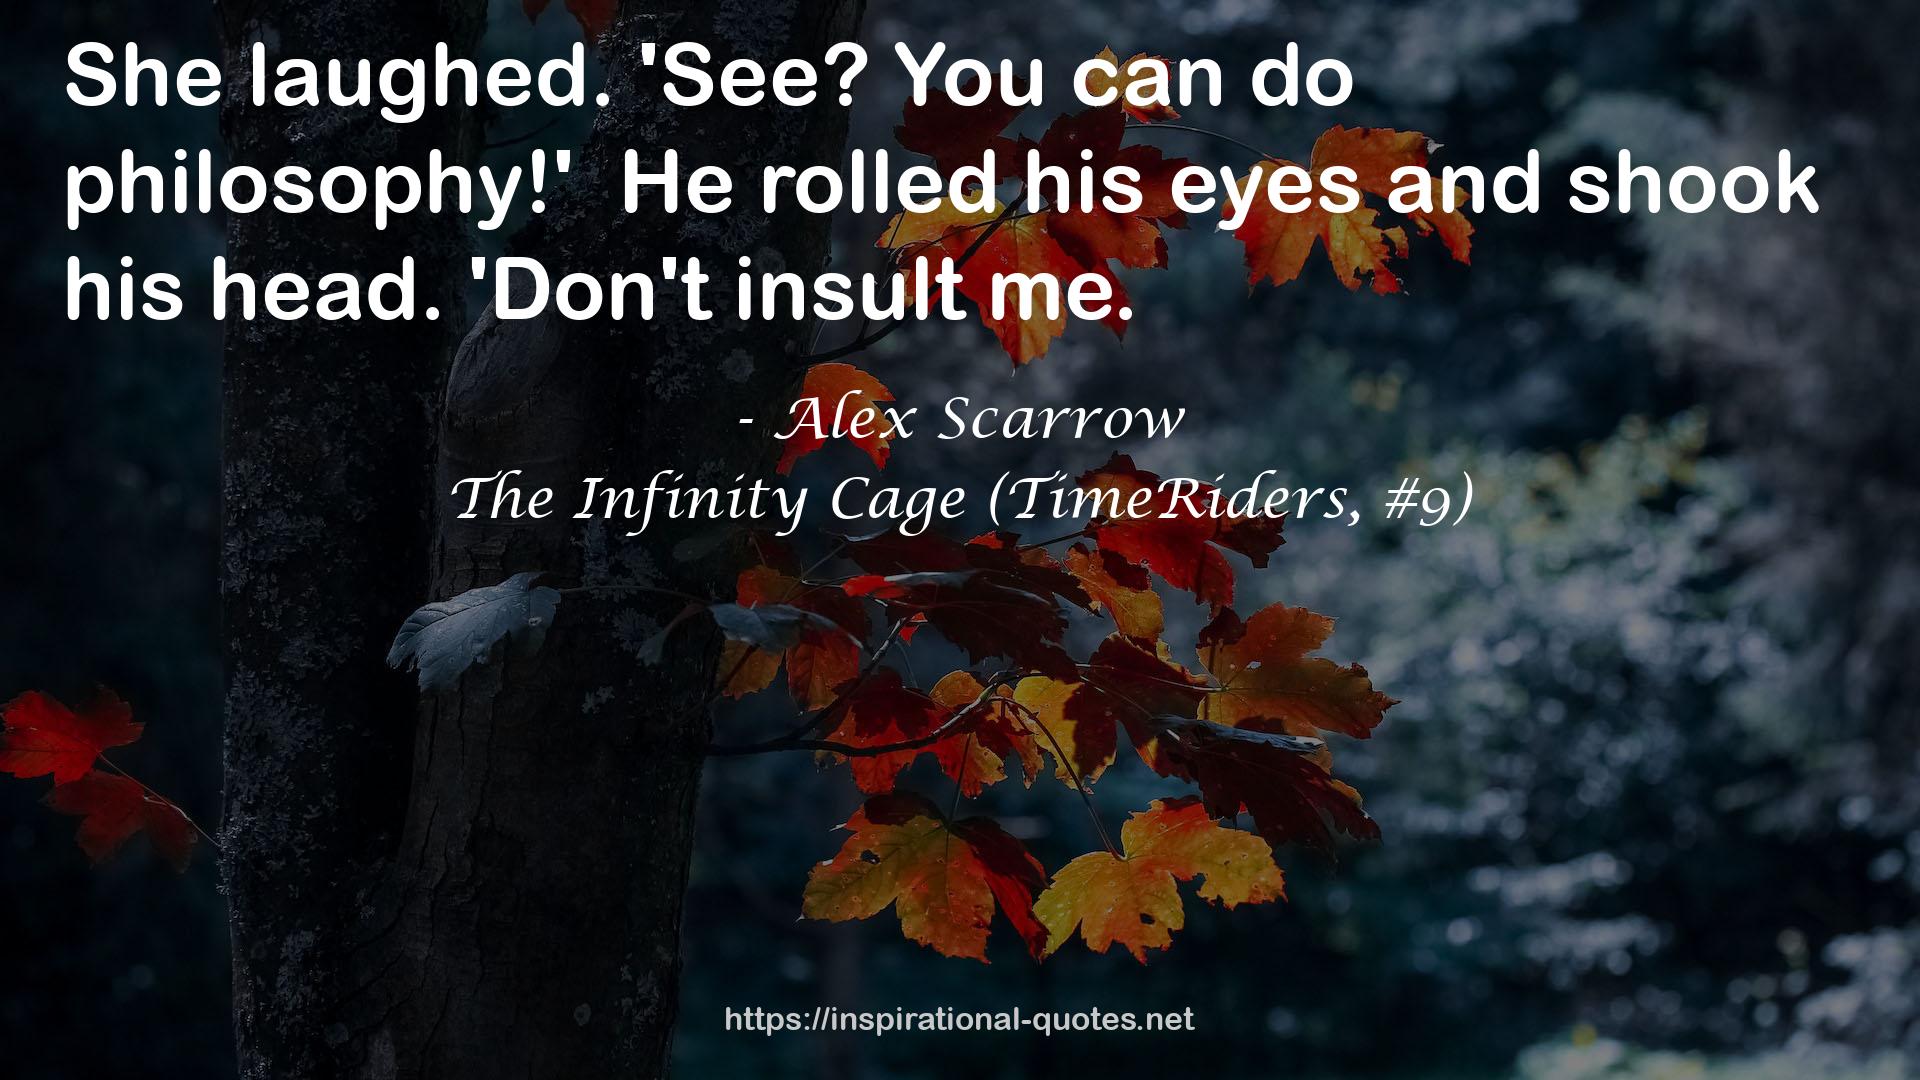 The Infinity Cage (TimeRiders, #9) QUOTES